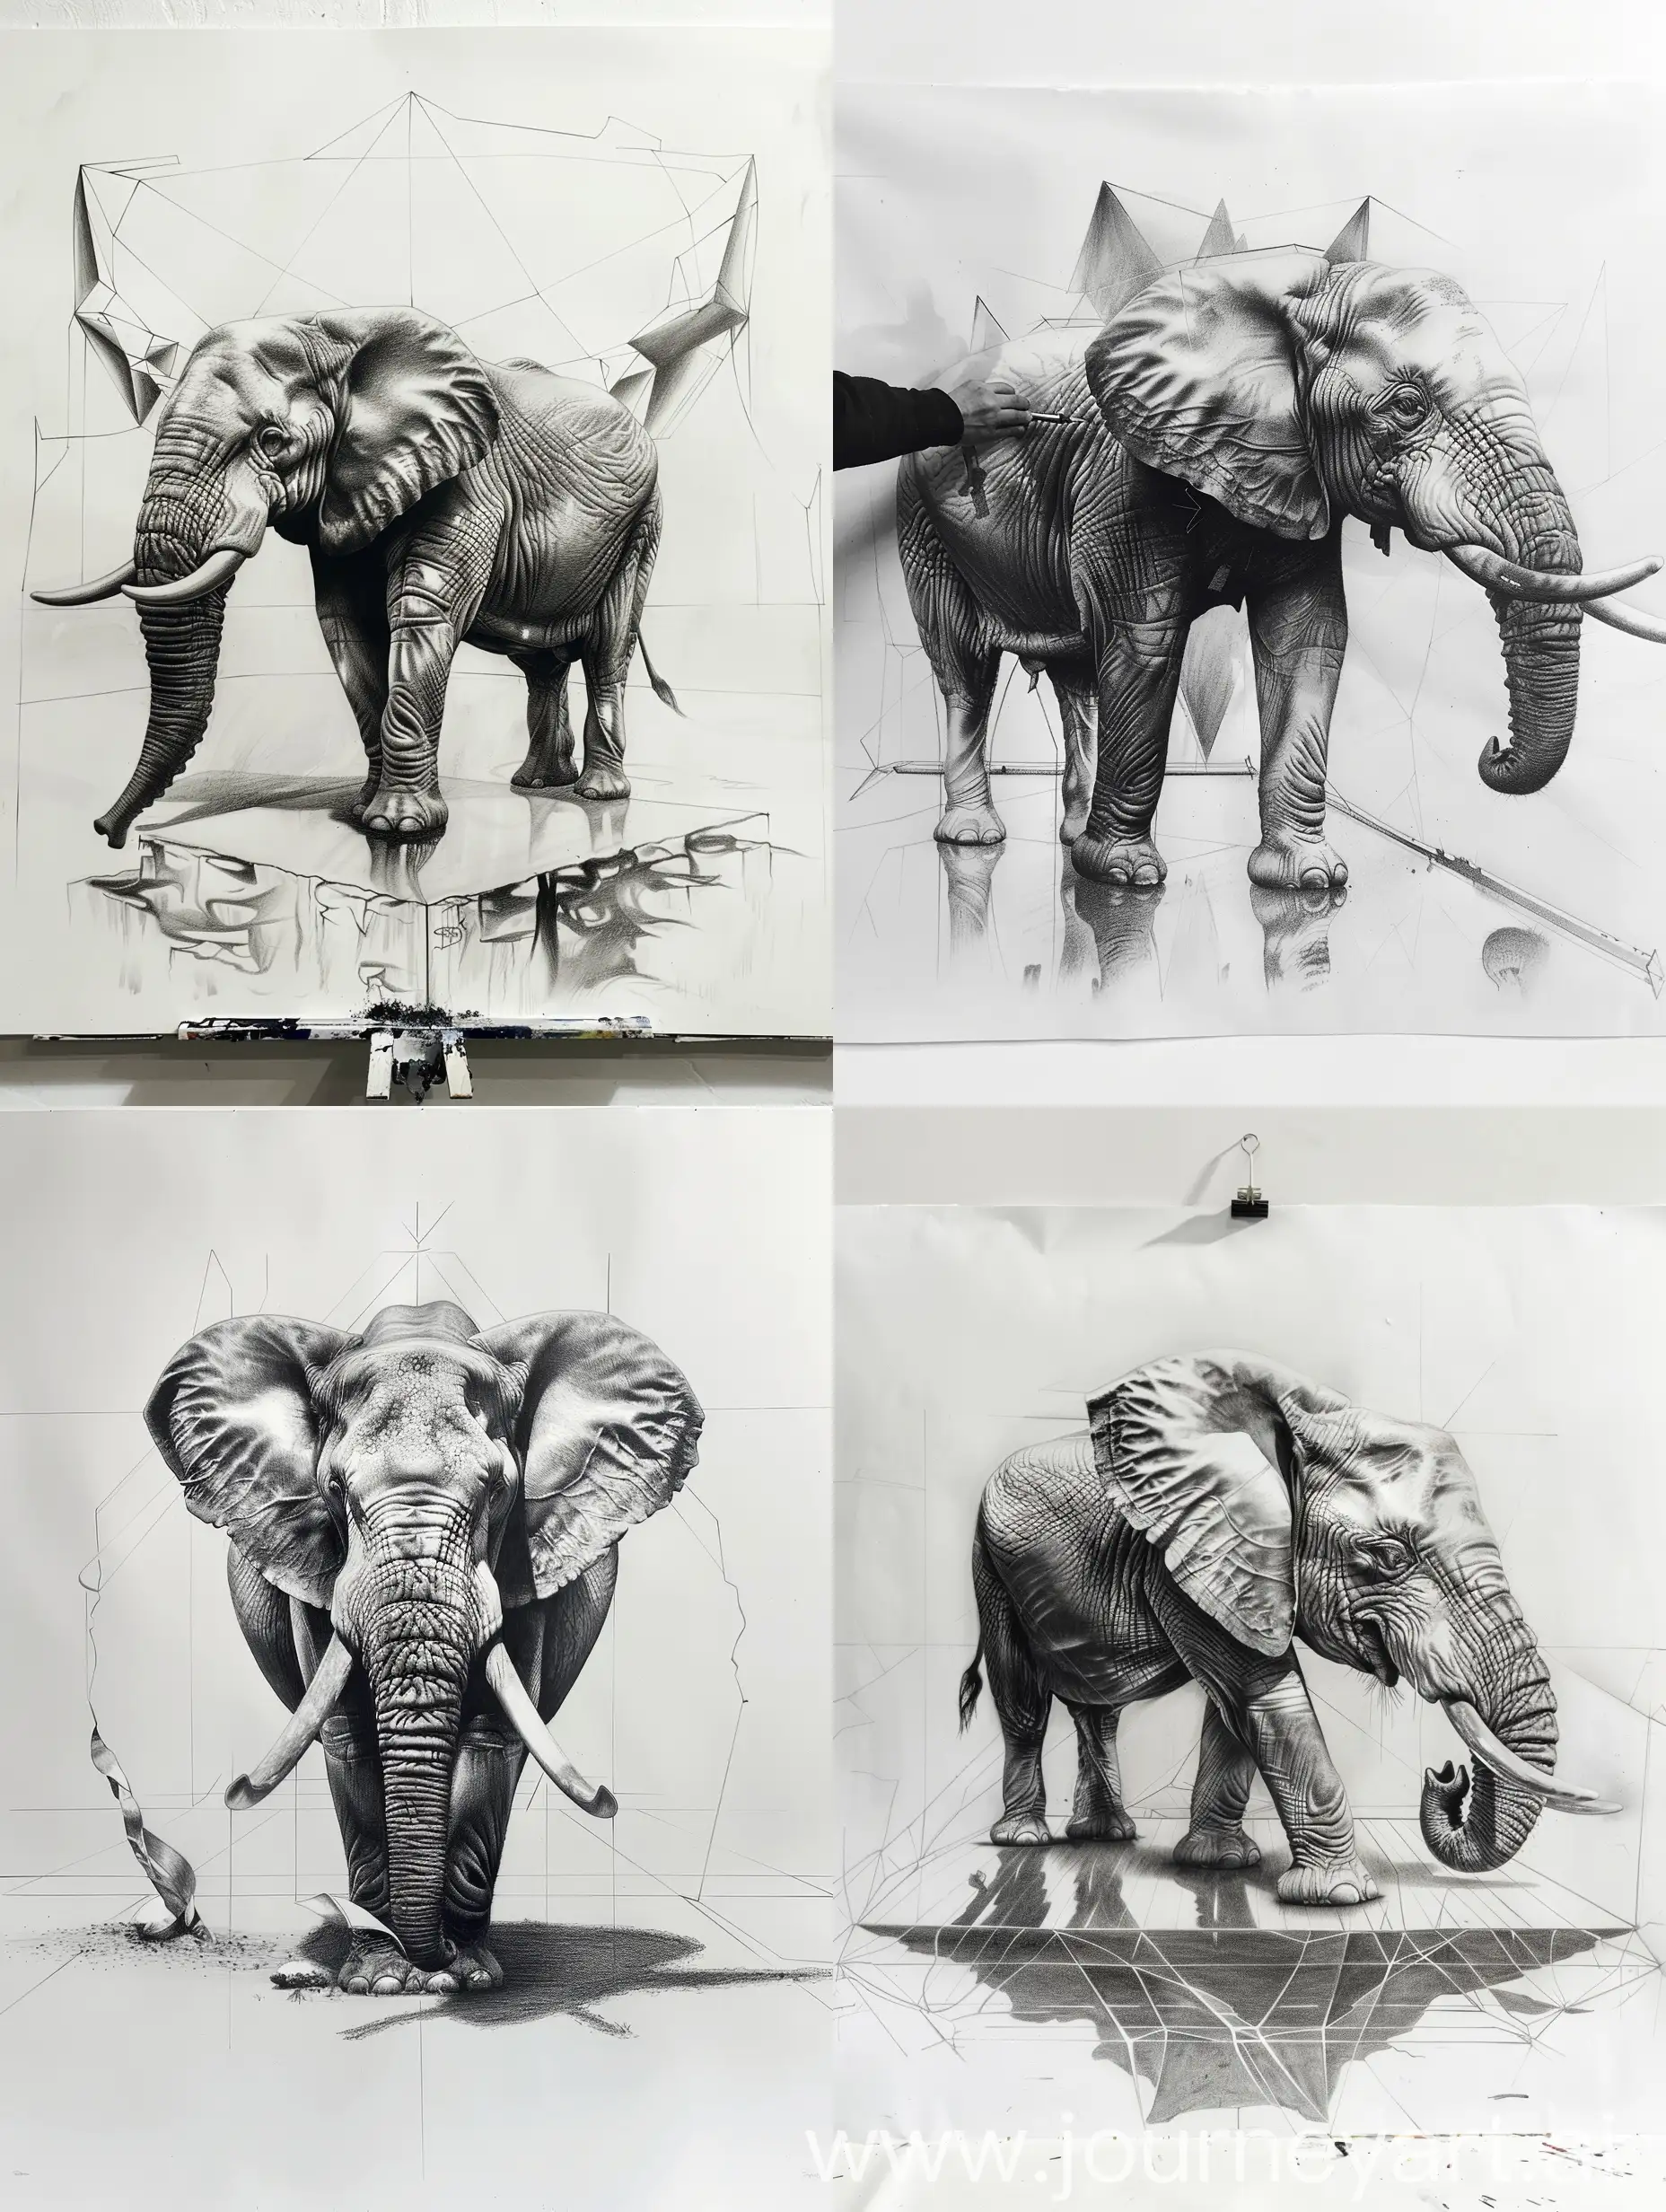 genre creative dark hyper realistic pencil sketch of a elephant on a large canvas in great details with white background
